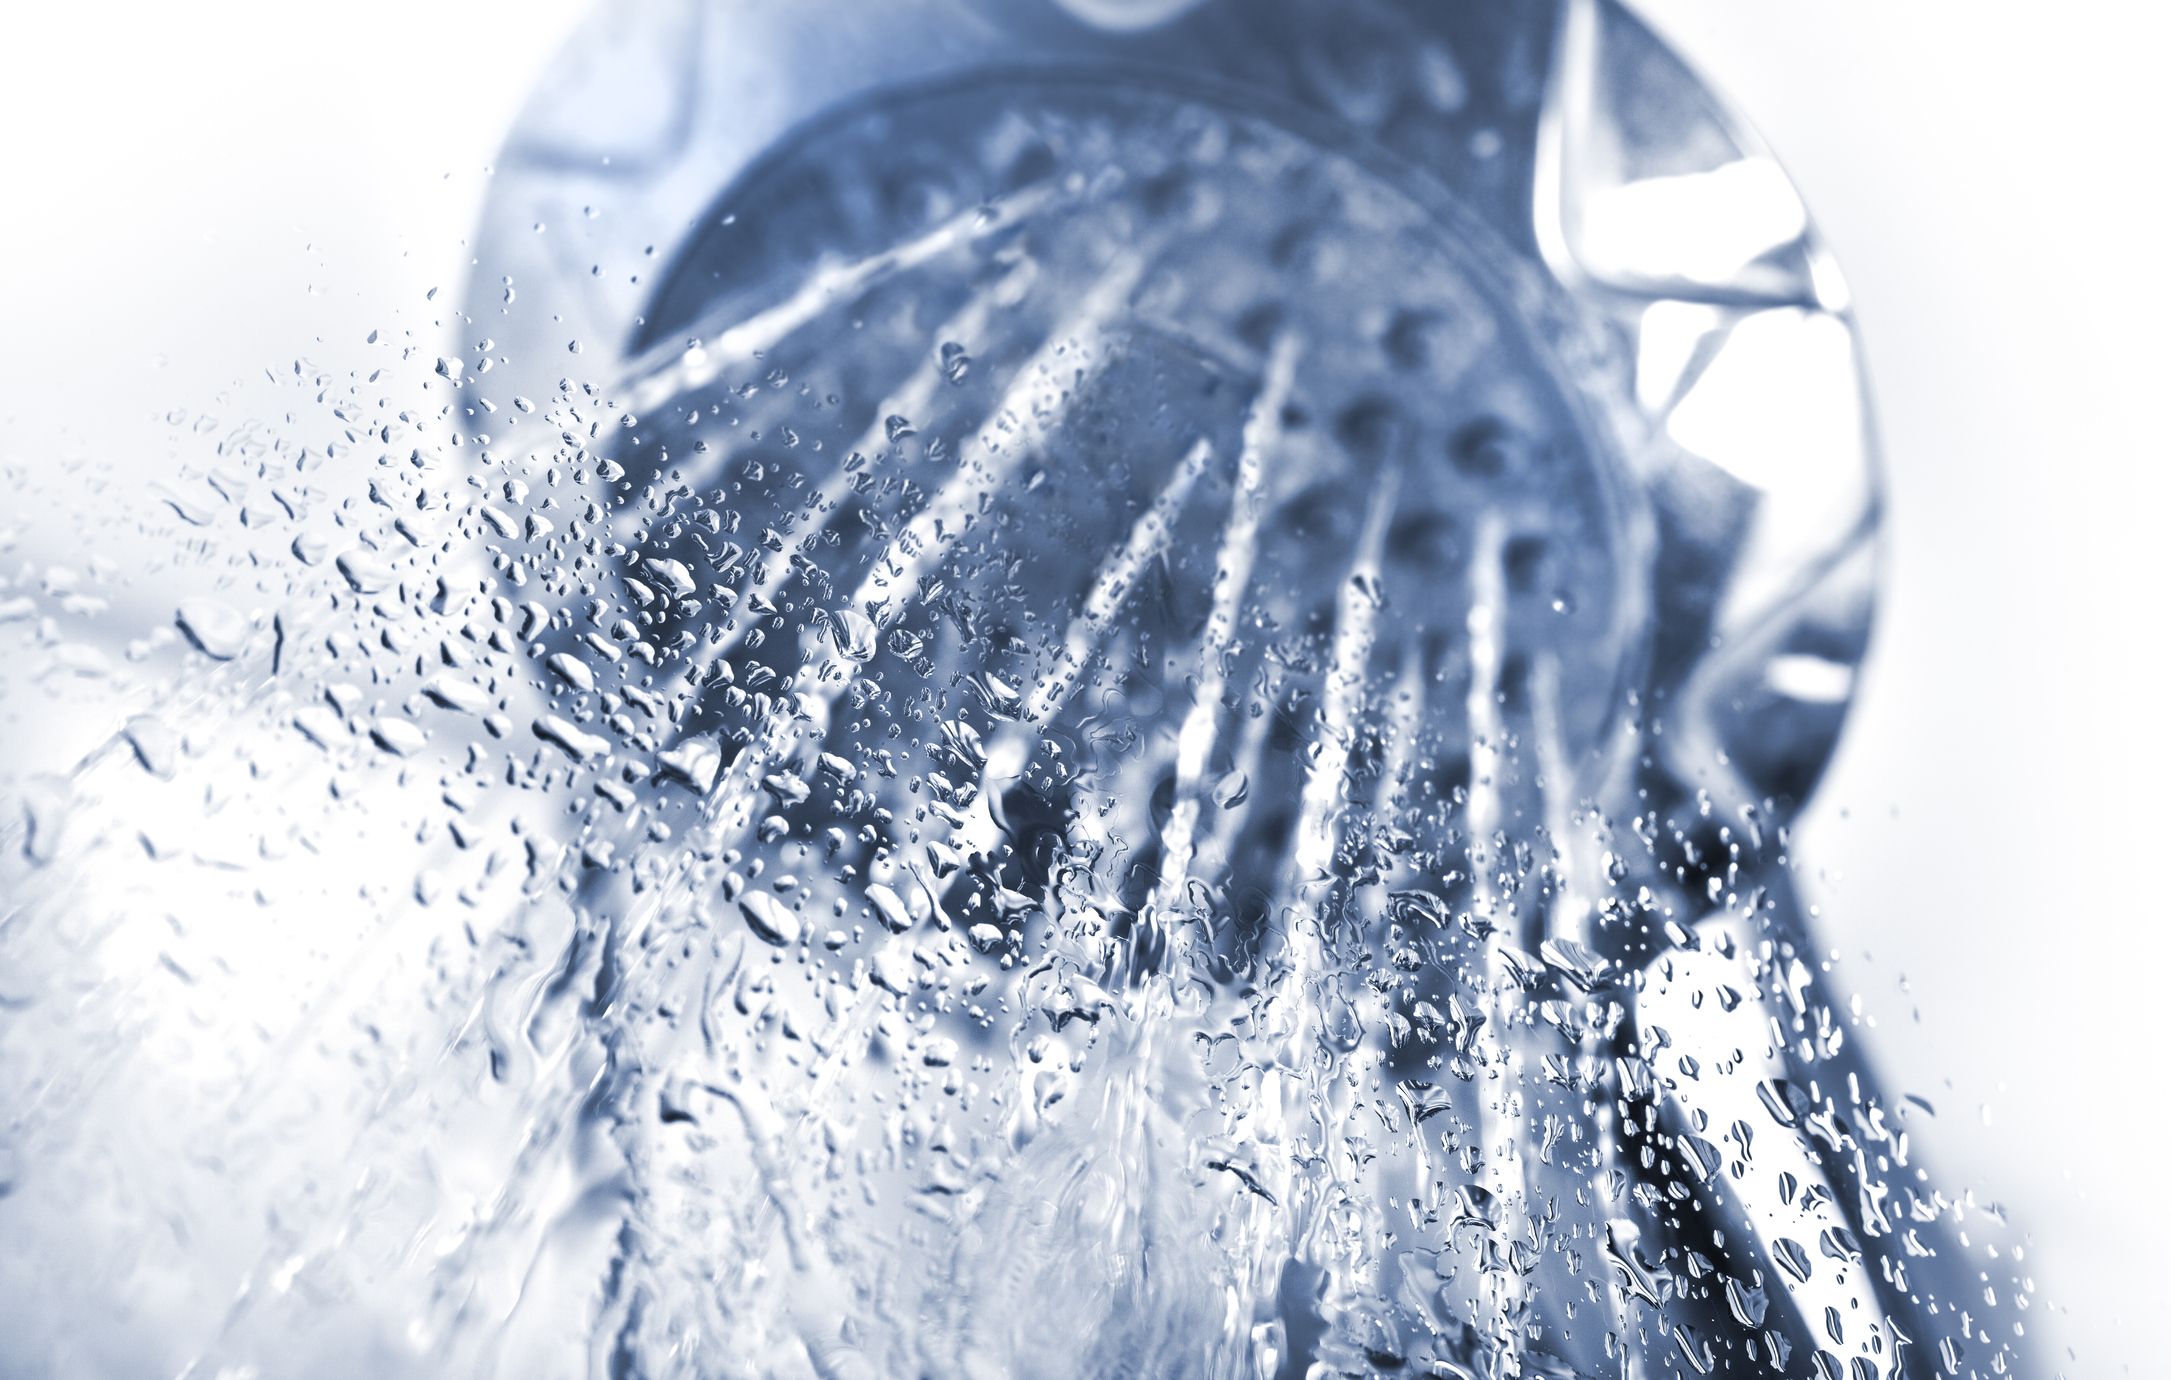 Cold Facts to Help Avoid Injury from Water-Circulating Hot/Cold